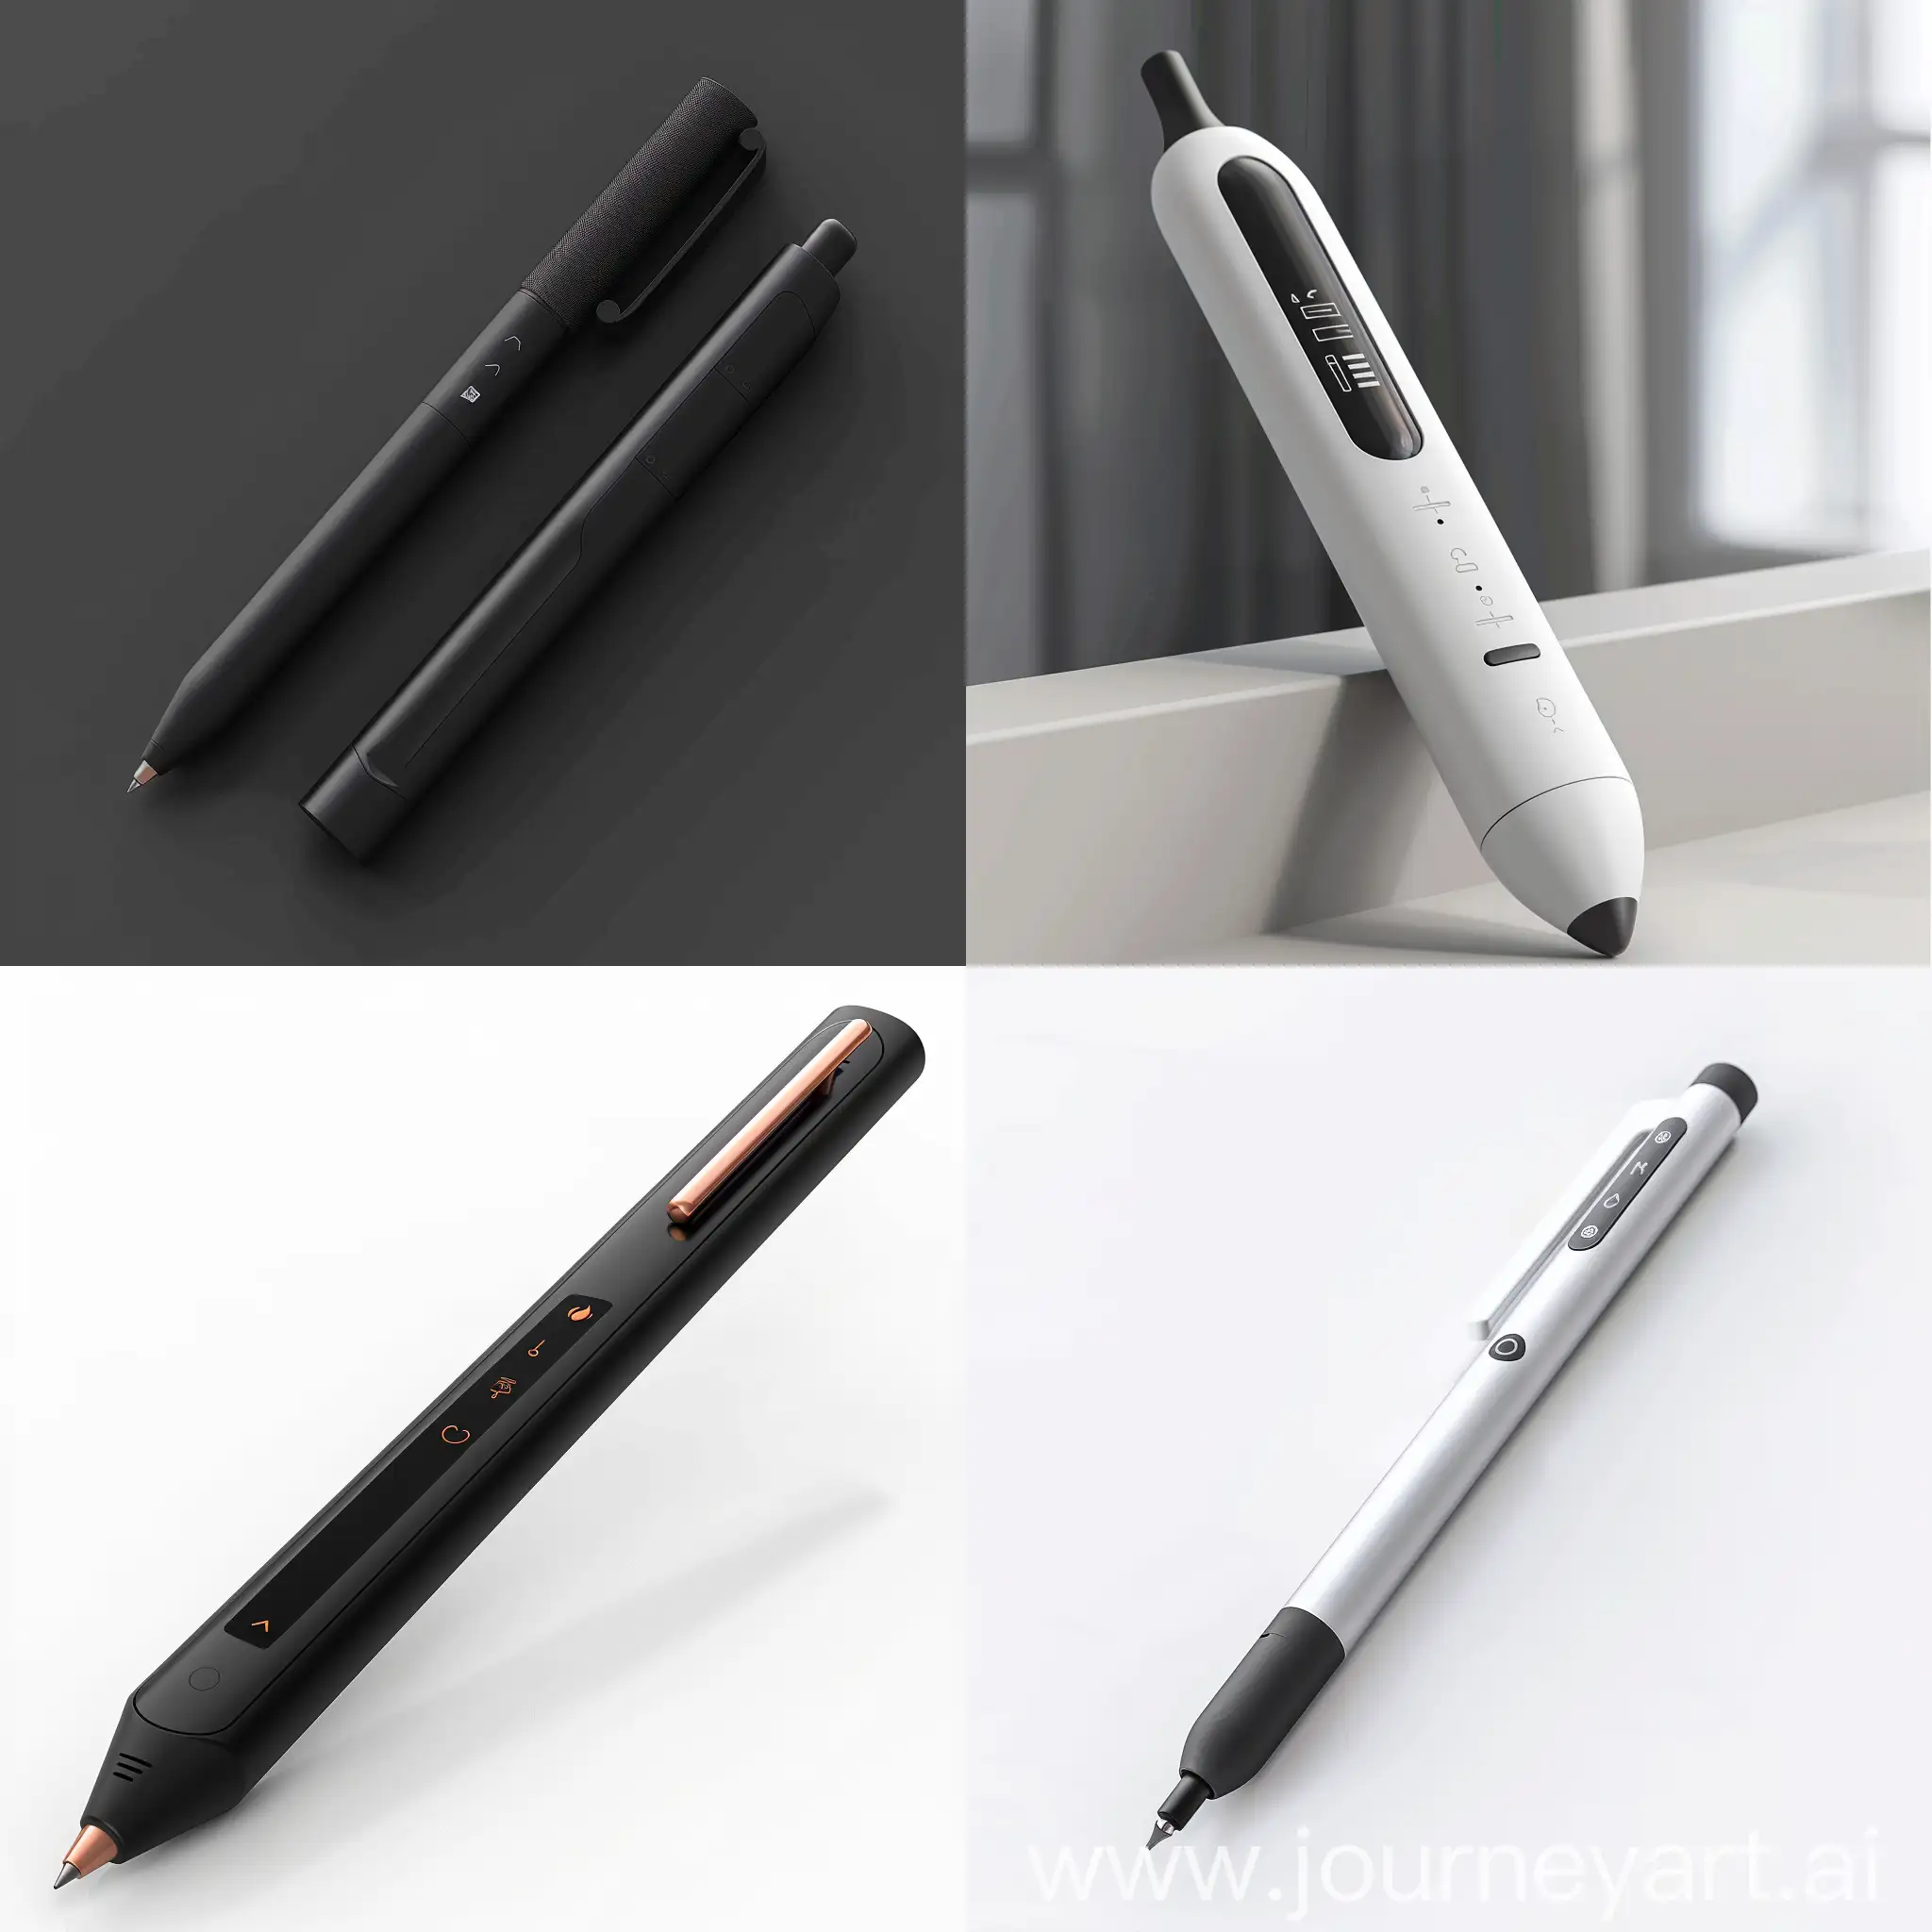 Realistic-Electric-Heating-Pen-Tech-Displaying-Touch-Sensation